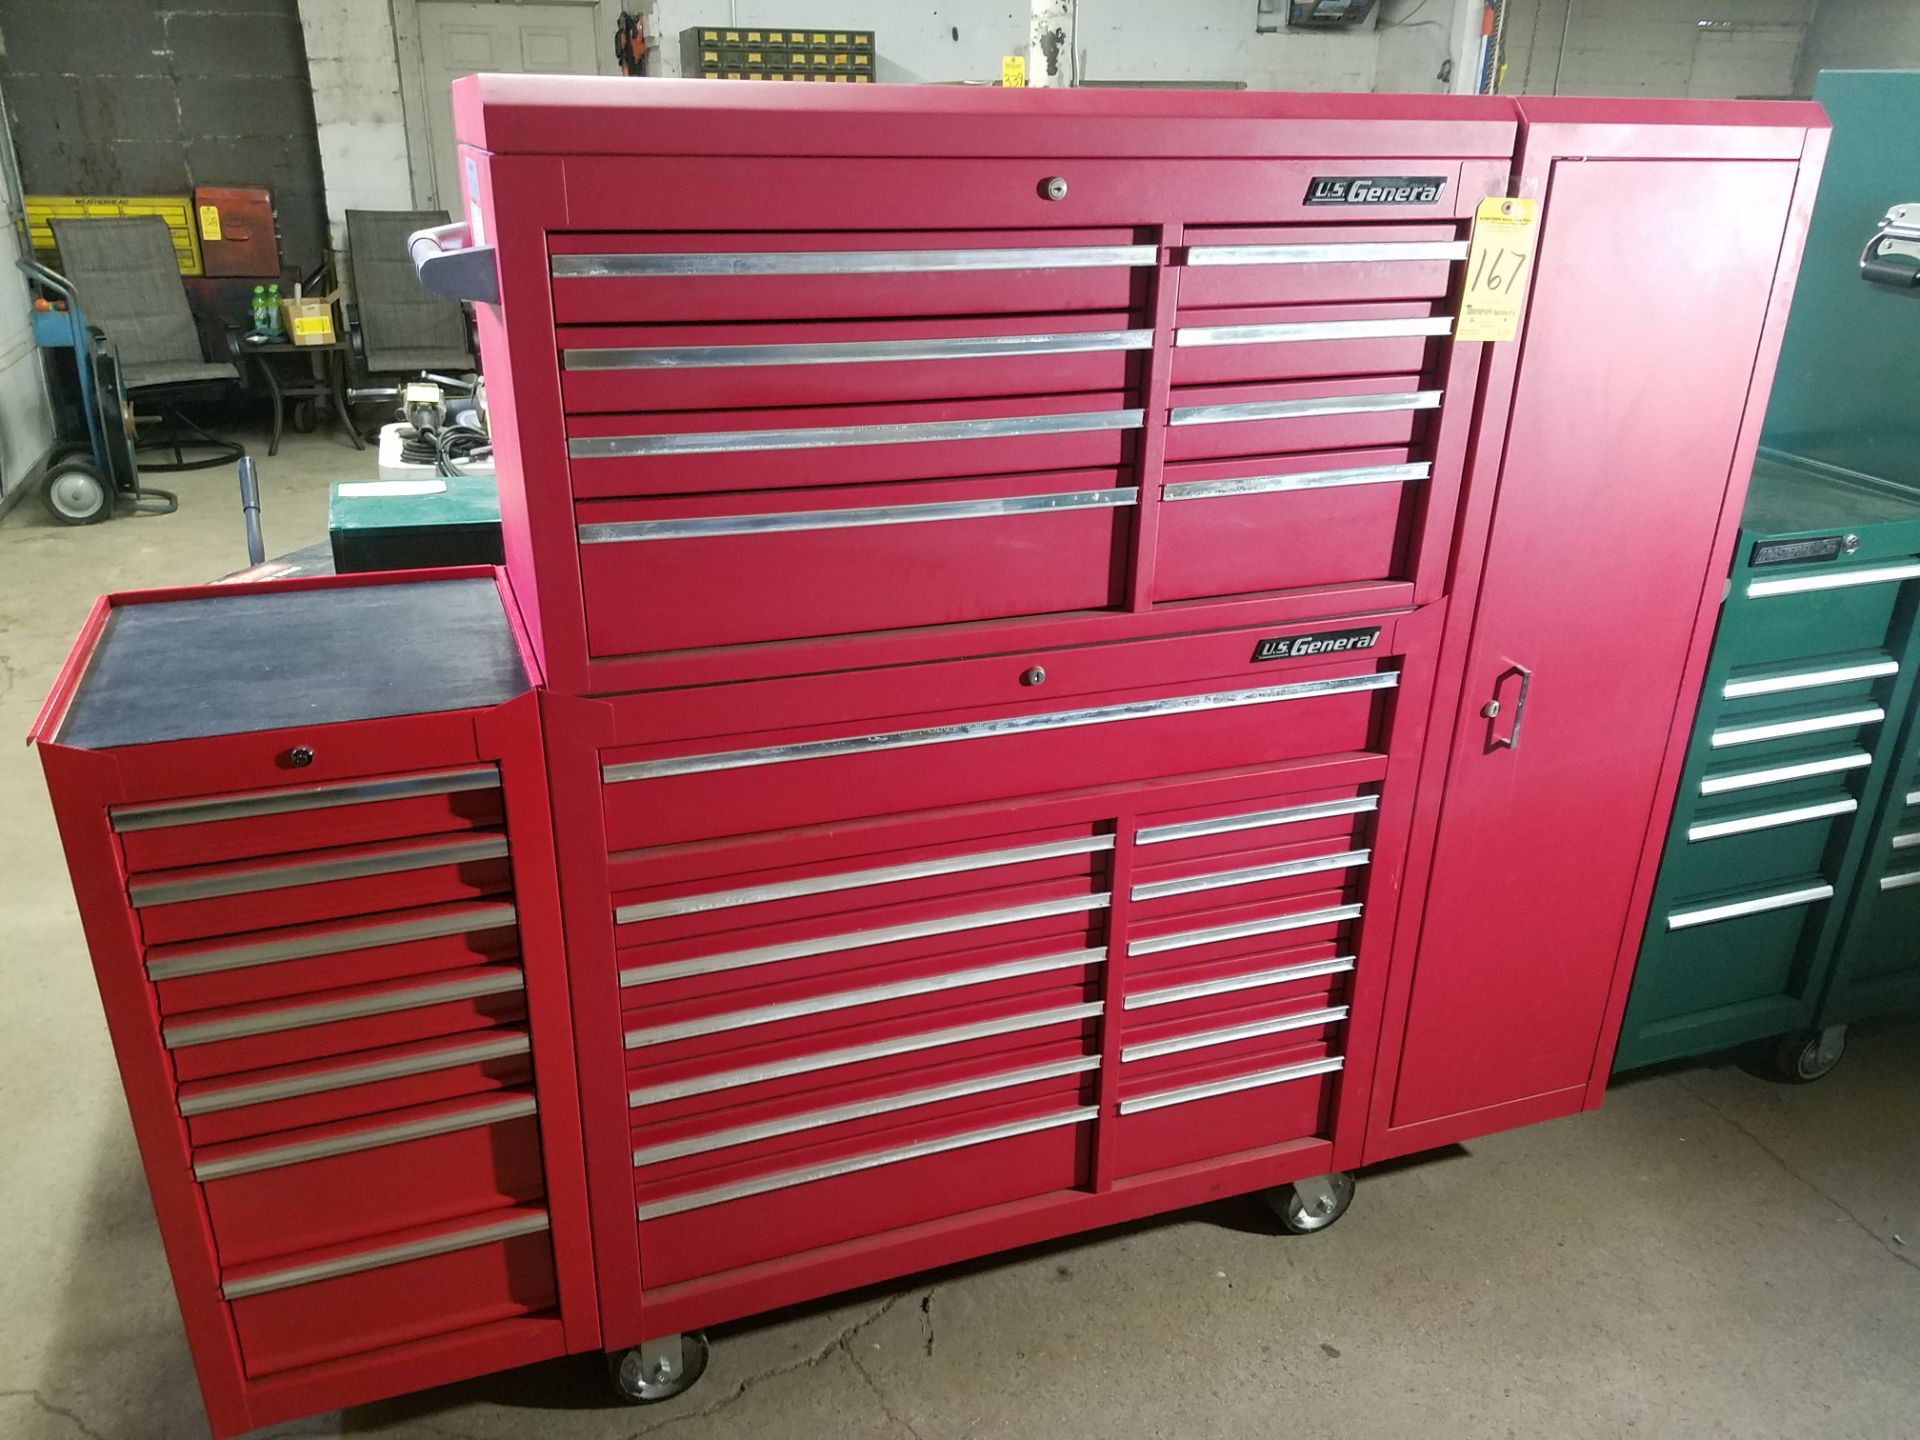 U.S. General Roll Around Tool Box, 42 Inch, with (2) Side Cabinets